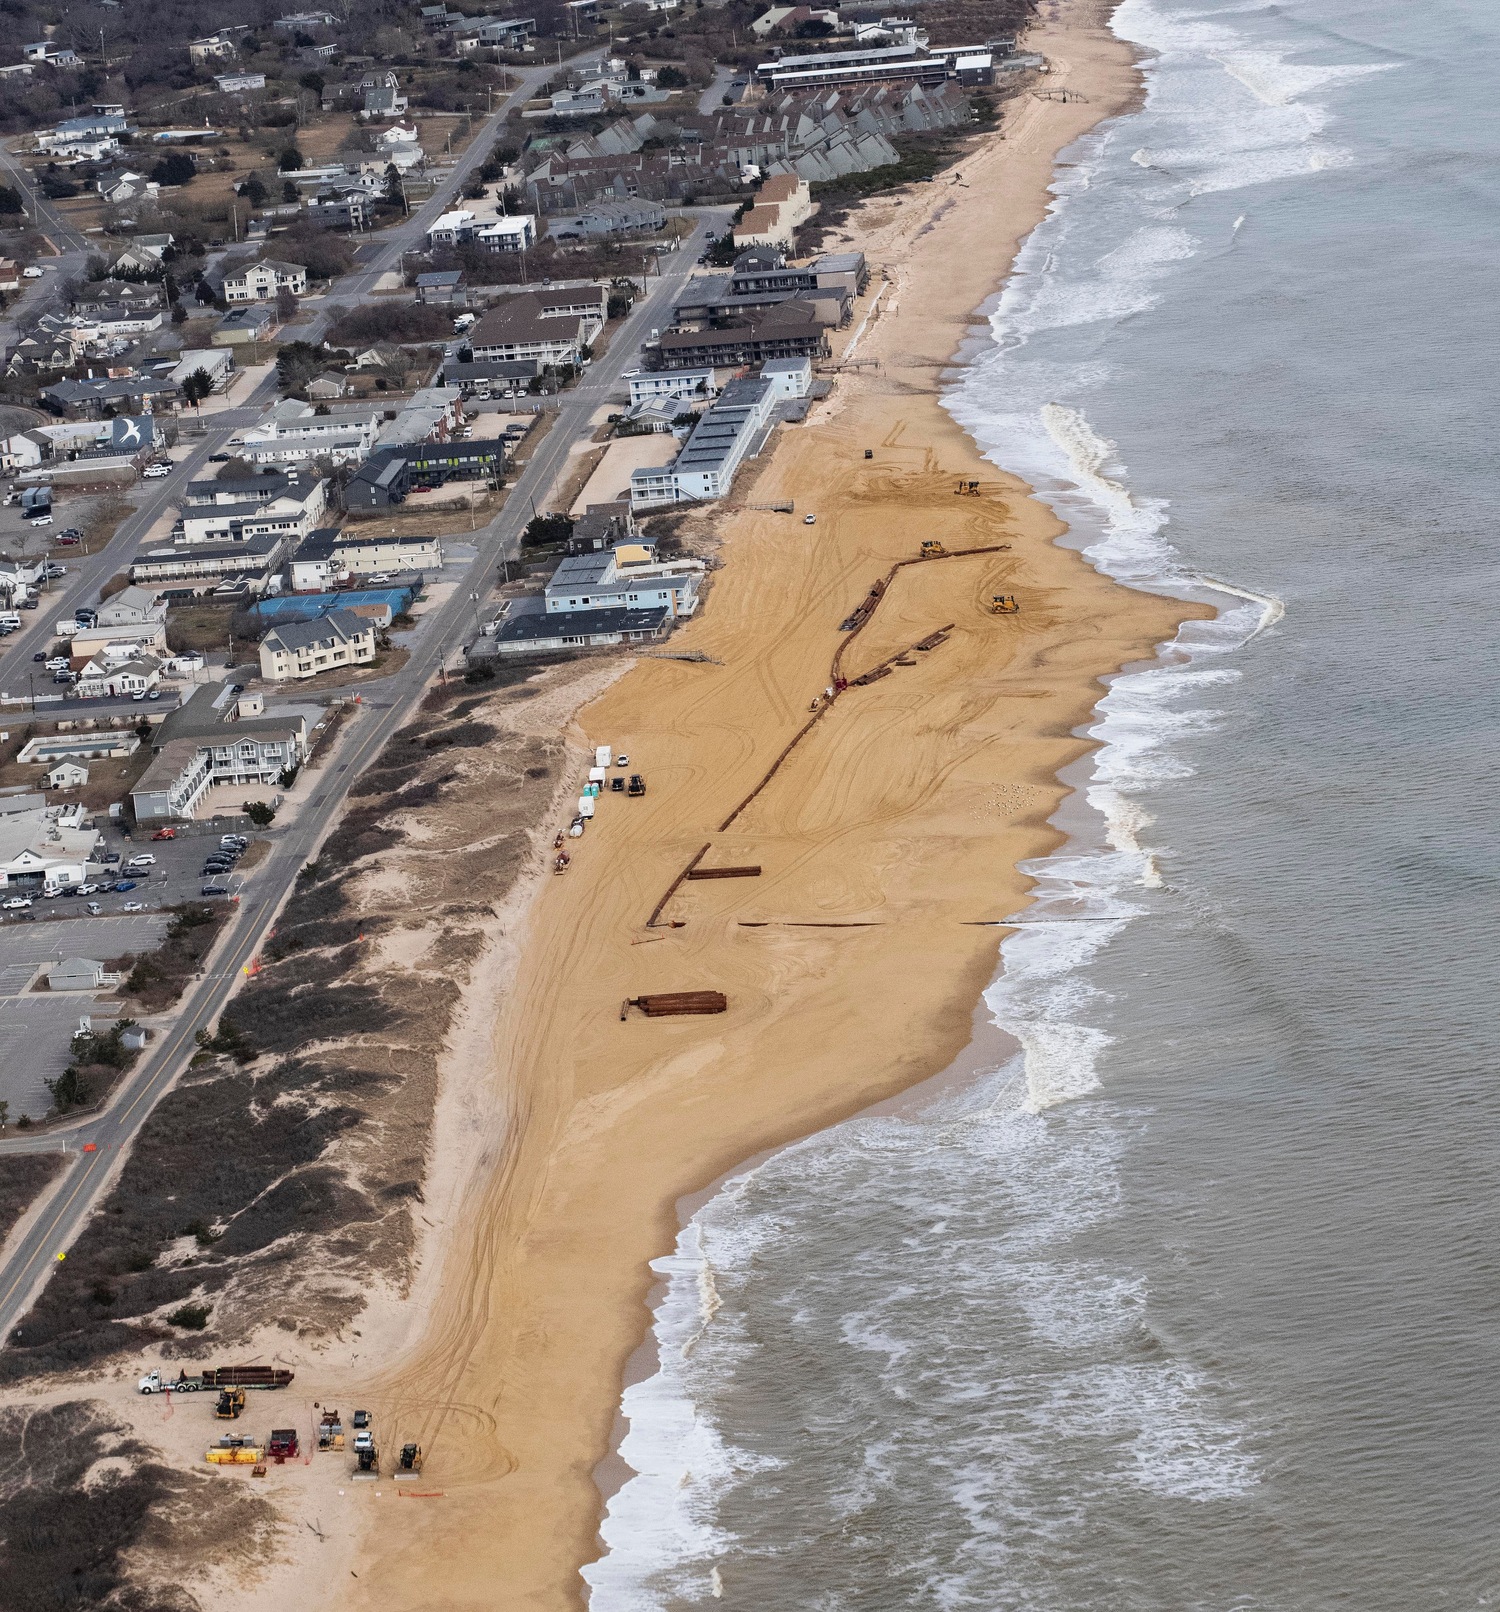 The beach nourishment work was already nearly a third of the way complete when work was paused on Tuesday because of the storm. DOUG KUNTZ PHOTO